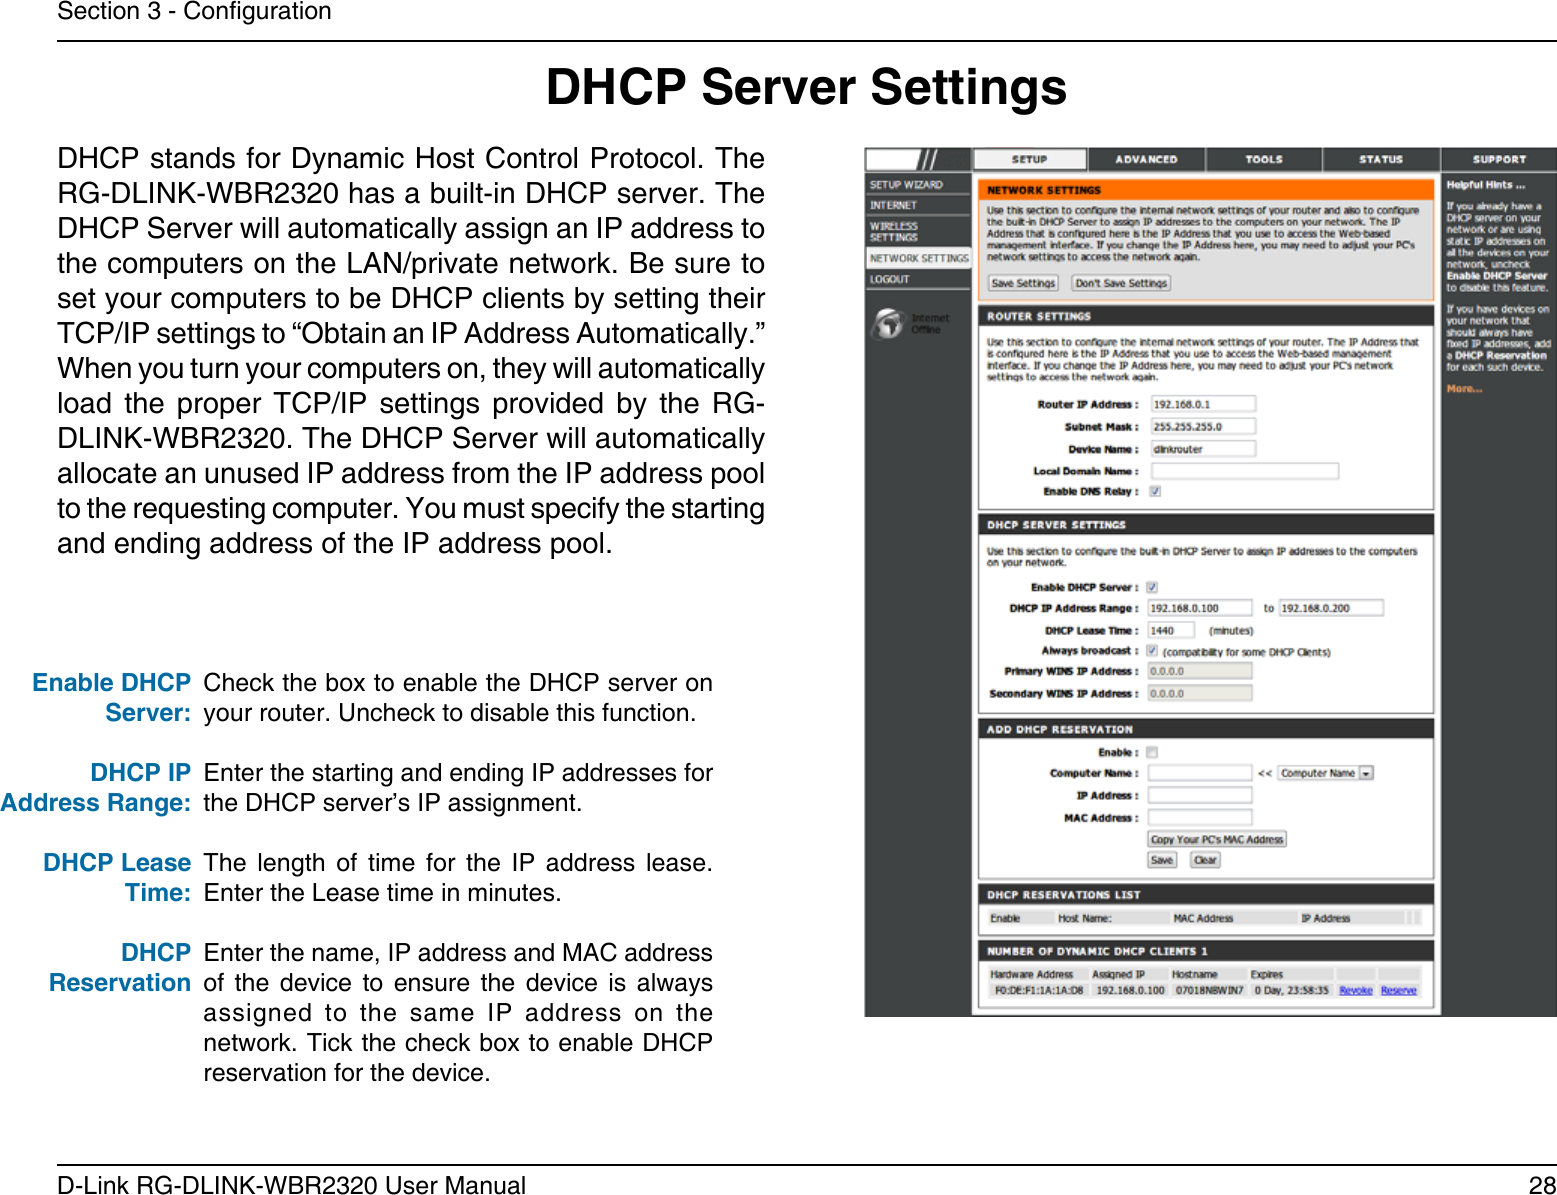 28D-Link RG-DLINK-WBR2320 User ManualSection 3 - CongurationCheck the box to enable the DHCP server on your router. Uncheck to disable this function.Enter the starting and ending IP addresses for the DHCP server’s IP assignment.The  length  of  time  for  the  IP  address  lease. Enter the Lease time in minutes.Enter the name, IP address and MAC address of  the  device  to  ensure  the  device  is  always assigned  to  the  same  IP  address  on  the network. Tick the check box to enable DHCP reservation for the device.Enable DHCP Server:DHCP IPAddress Range:DHCP Lease Time:DHCP ReservationDHCP Server SettingsDHCP stands for Dynamic Host Control Protocol. The RG-DLINK-WBR2320 has a built-in DHCP server. The DHCP Server will automatically assign an IP address to the computers on the LAN/private network. Be sure to set your computers to be DHCP clients by setting their TCP/IP settings to “Obtain an IP Address Automatically.” When you turn your computers on, they will automatically load  the  proper  TCP/IP  settings  provided  by  the  RG-DLINK-WBR2320. The DHCP Server will automatically allocate an unused IP address from the IP address pool to the requesting computer. You must specify the starting and ending address of the IP address pool.